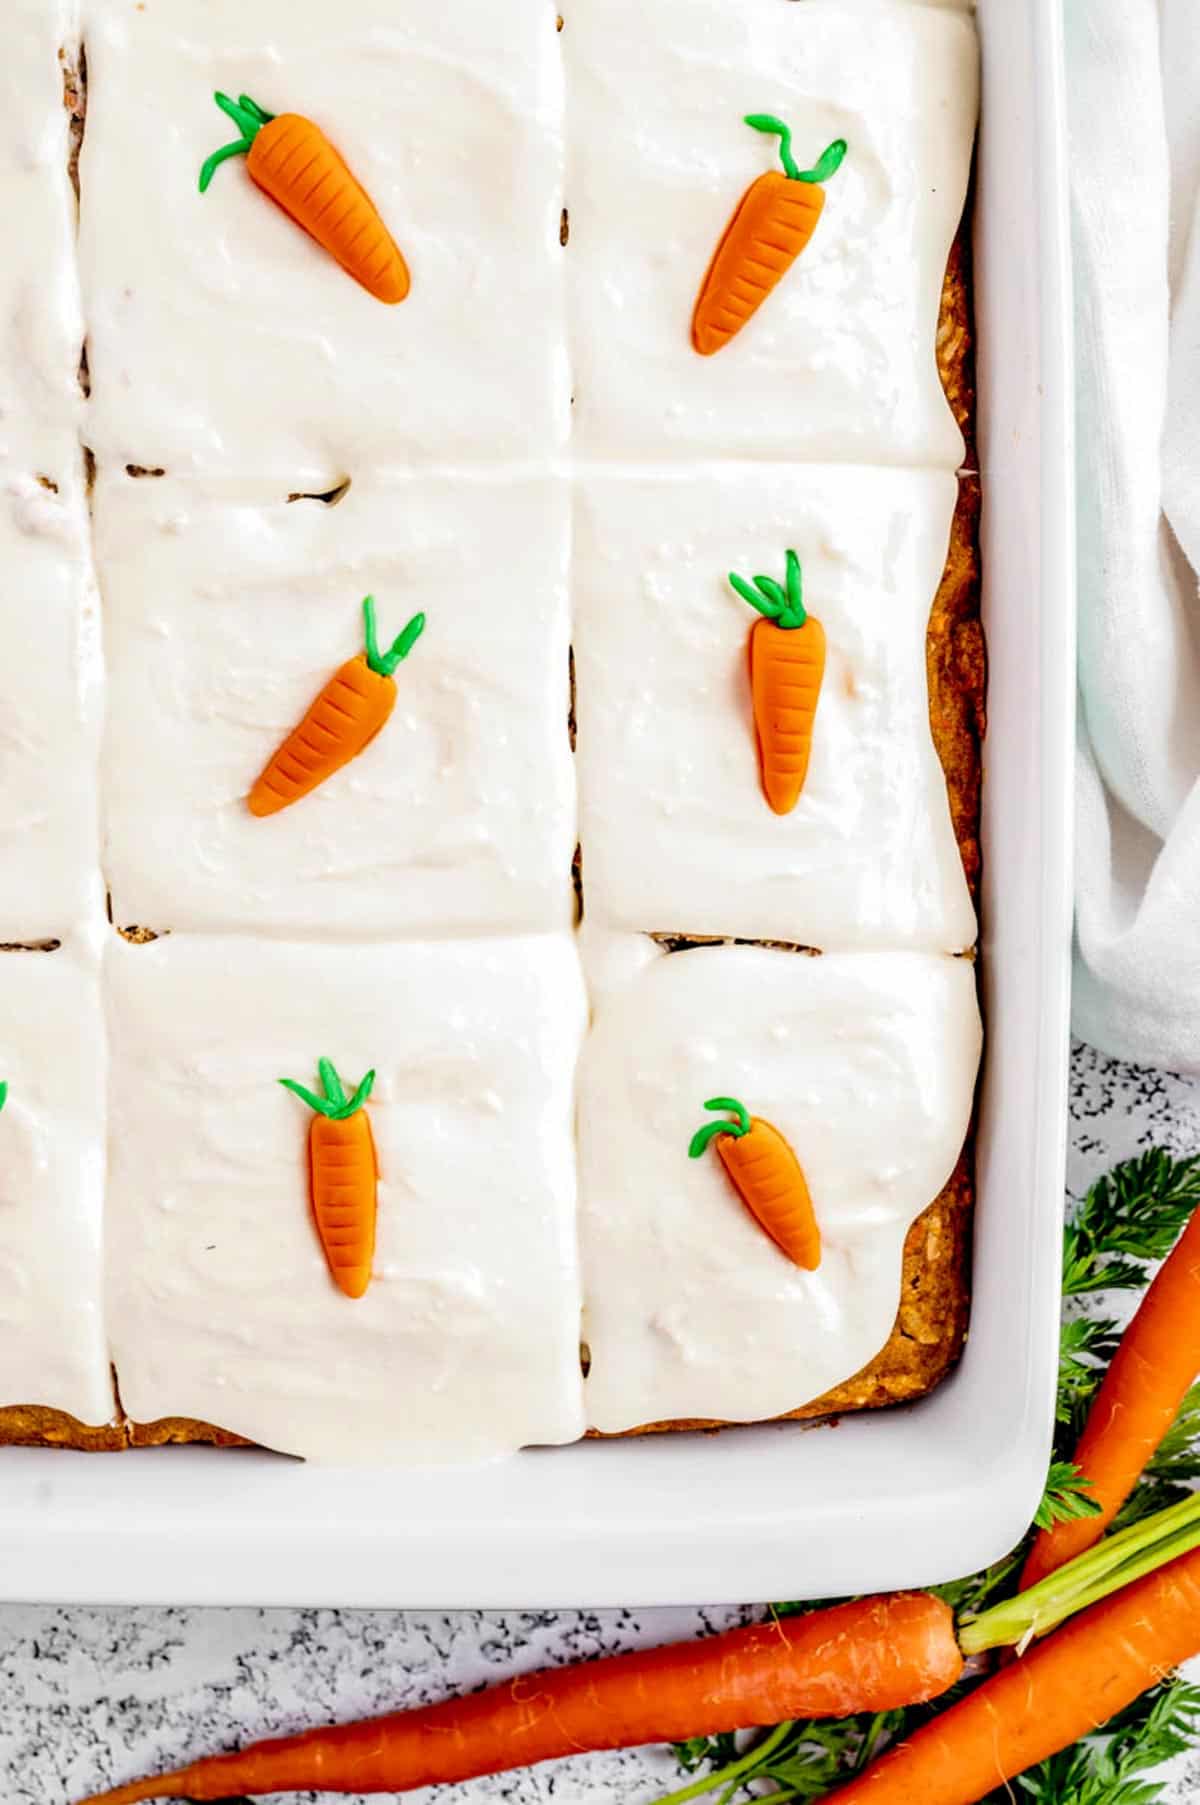 A close up image of the carrot cake with cute little carrot toppers.